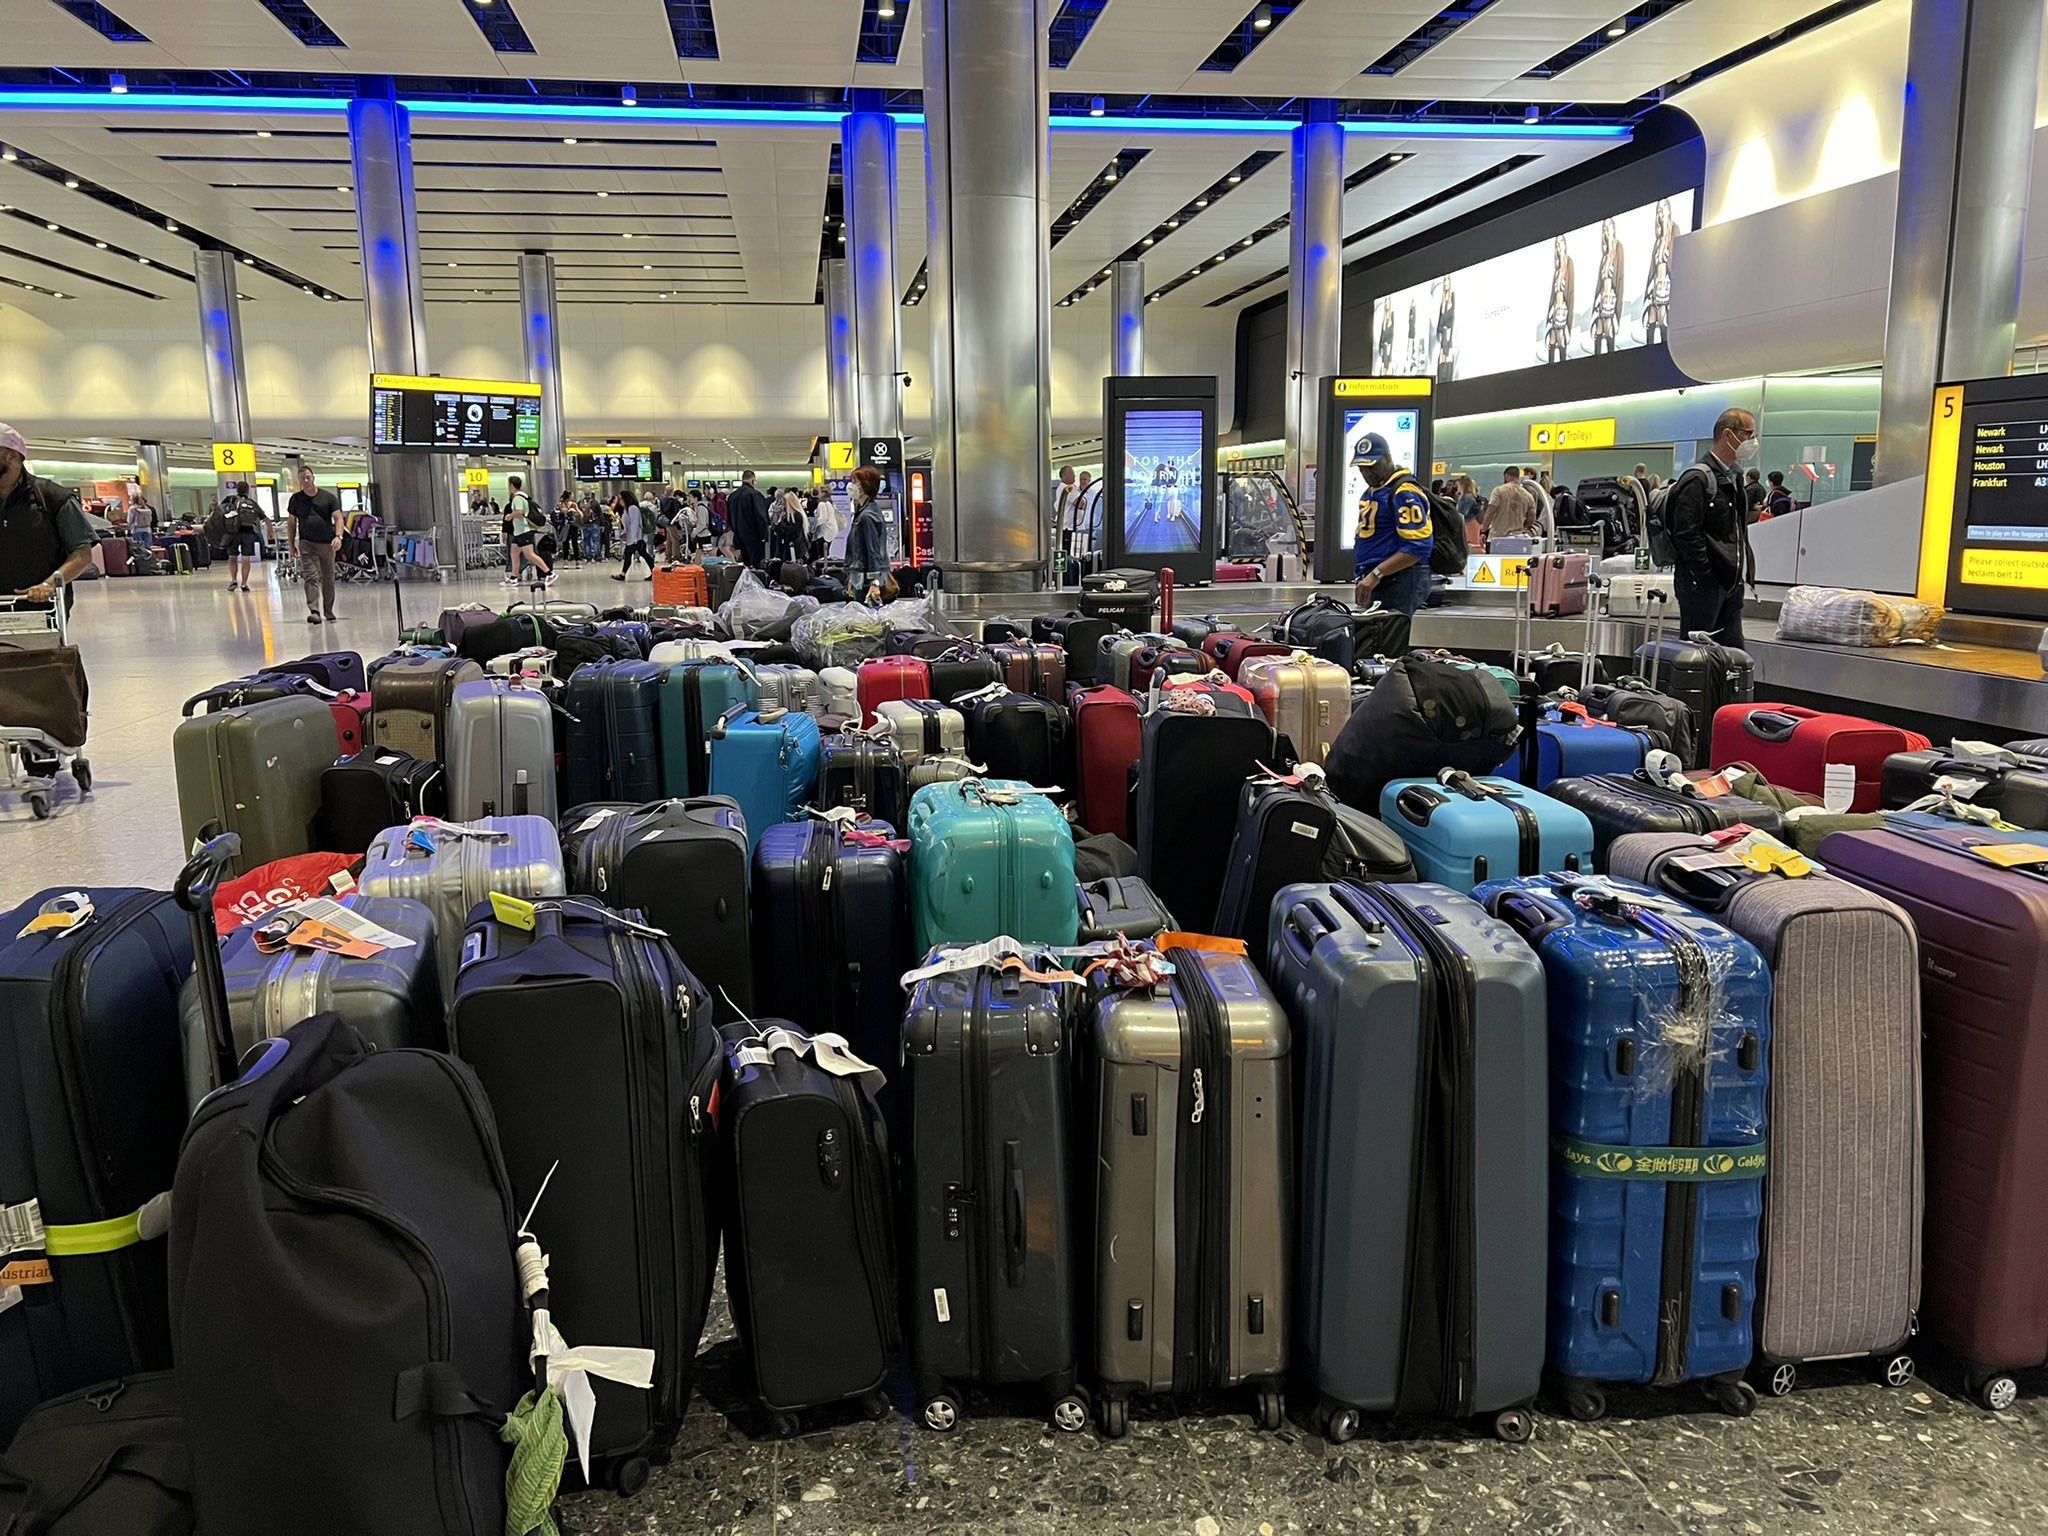 Heathrow has been plagued by baggage issues